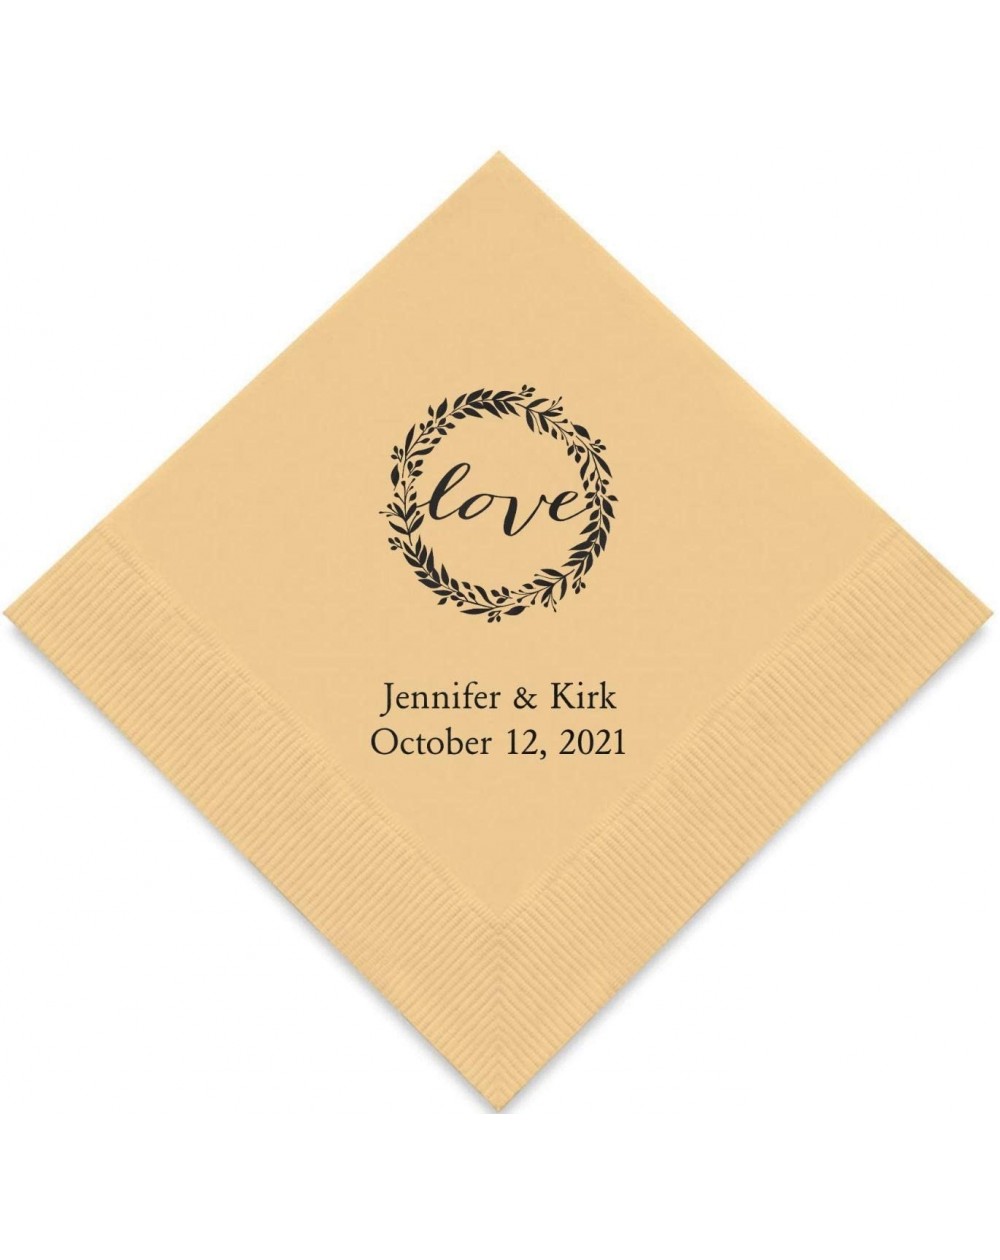 Tableware Personalized Printed Paper Napkins 3-Ply 50 Pack - Luncheon Sand - Sand - C5195IQ3NIN $29.00